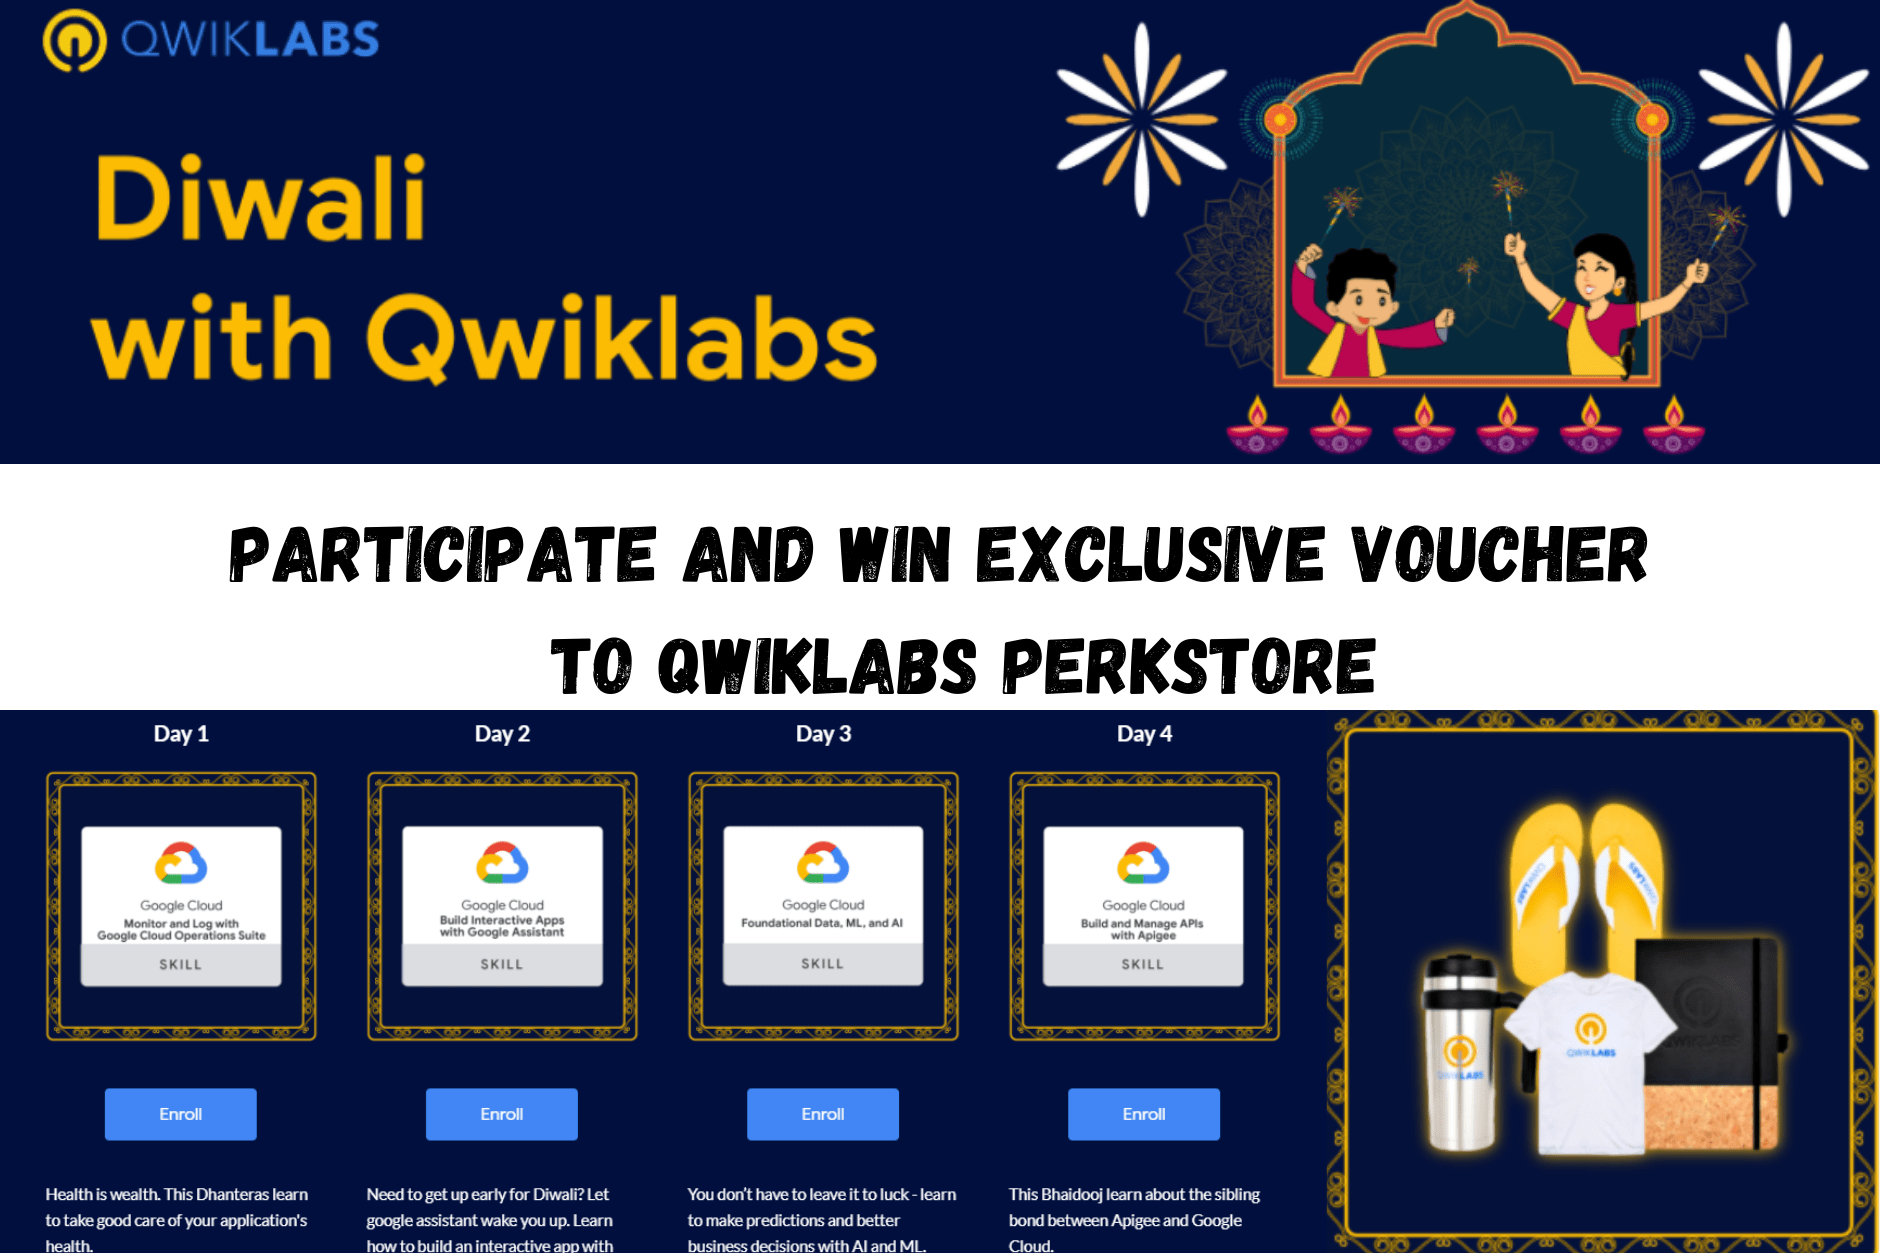 Participate and Win exclusive voucher to Qwiklabs Perkstore